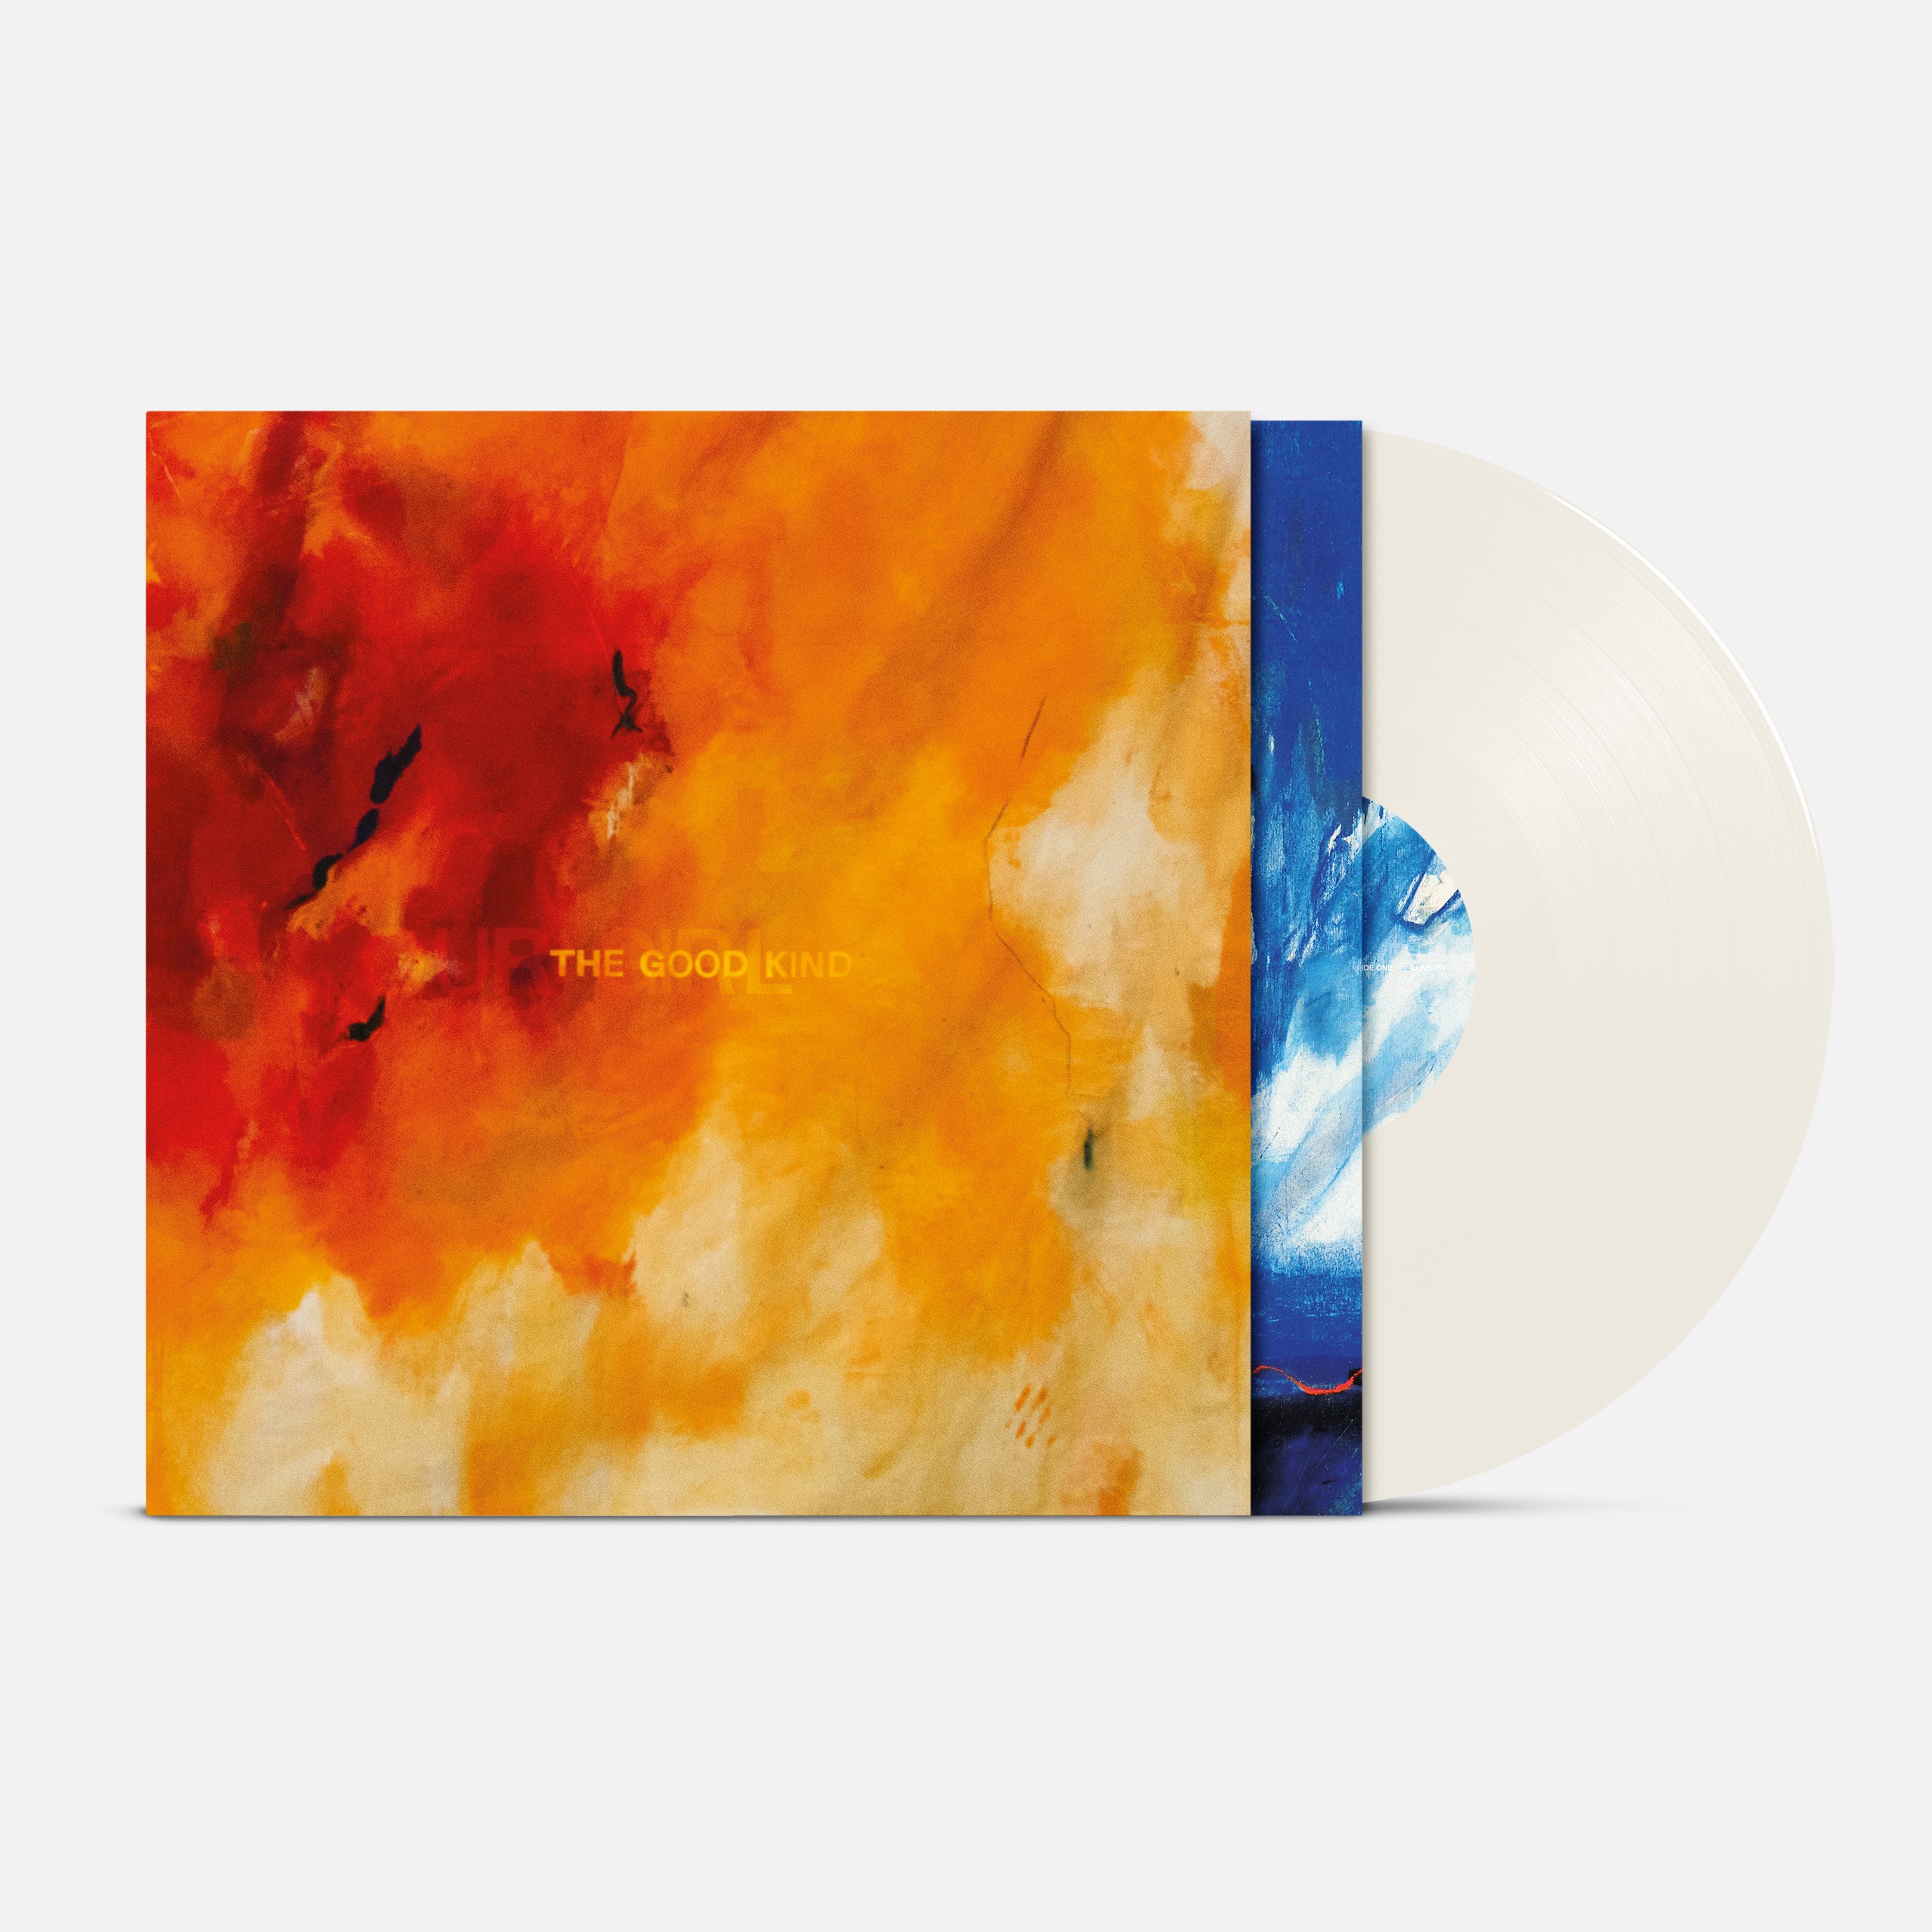 Our Girl - The Good Kind: Limited Milky Clear Vinyl LP